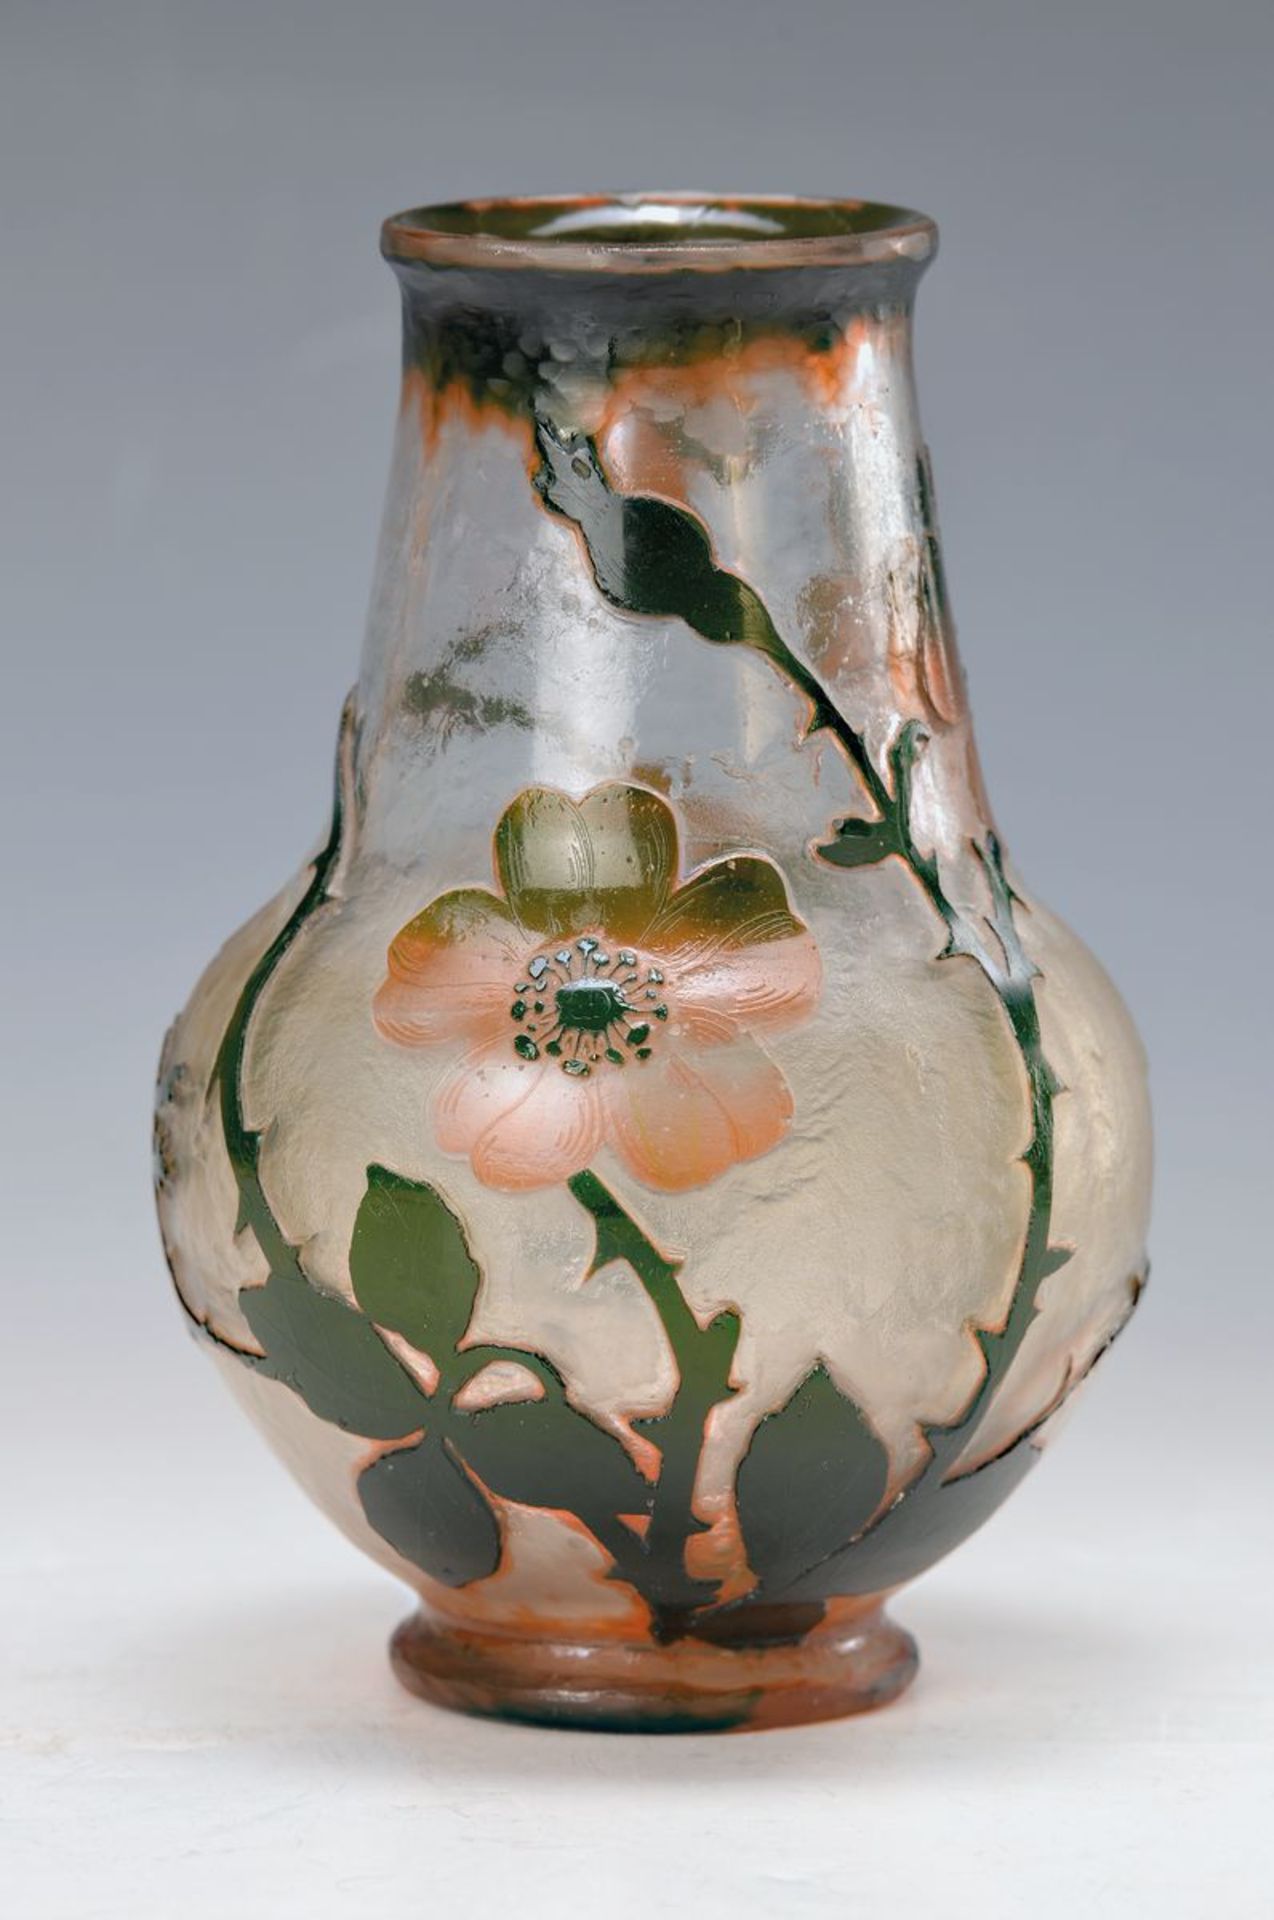 vase, Daum Nancy, around 1900, colorless glass rose and green overlay, cut, polished and etched,